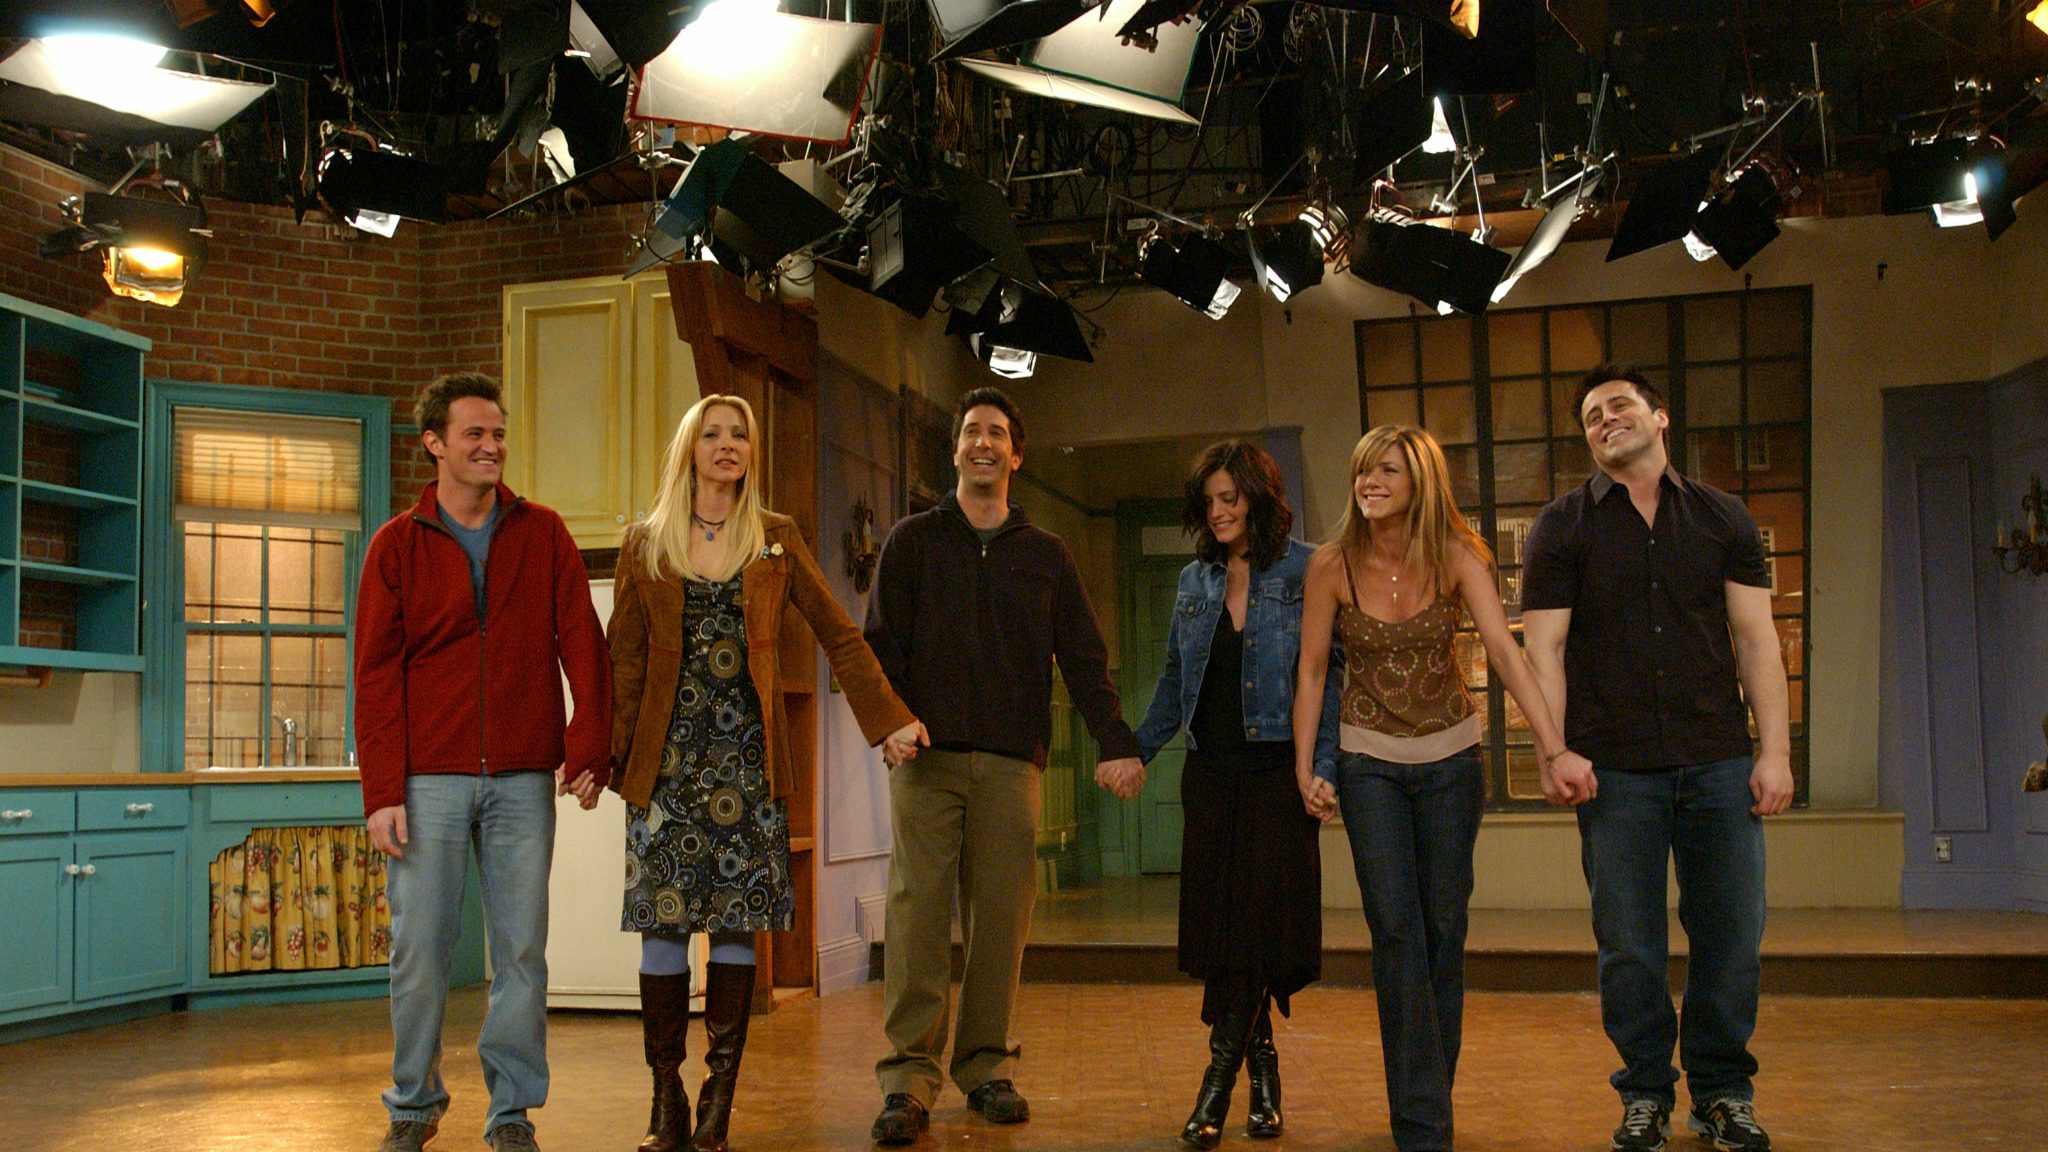 Cast of FRIENDS taking a bow